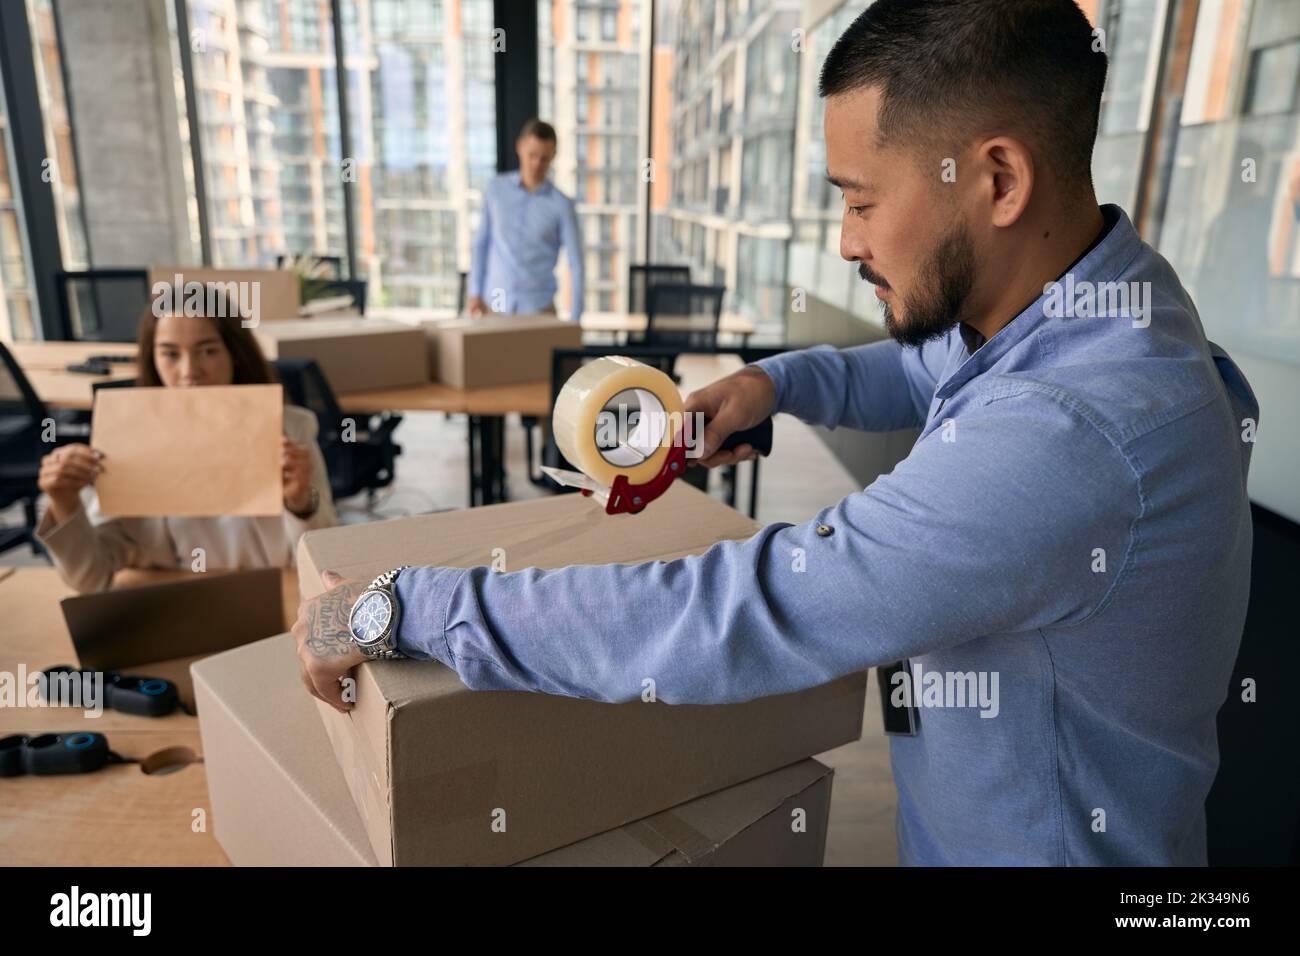 Team of corporate employees preparing for office move Stock Photo